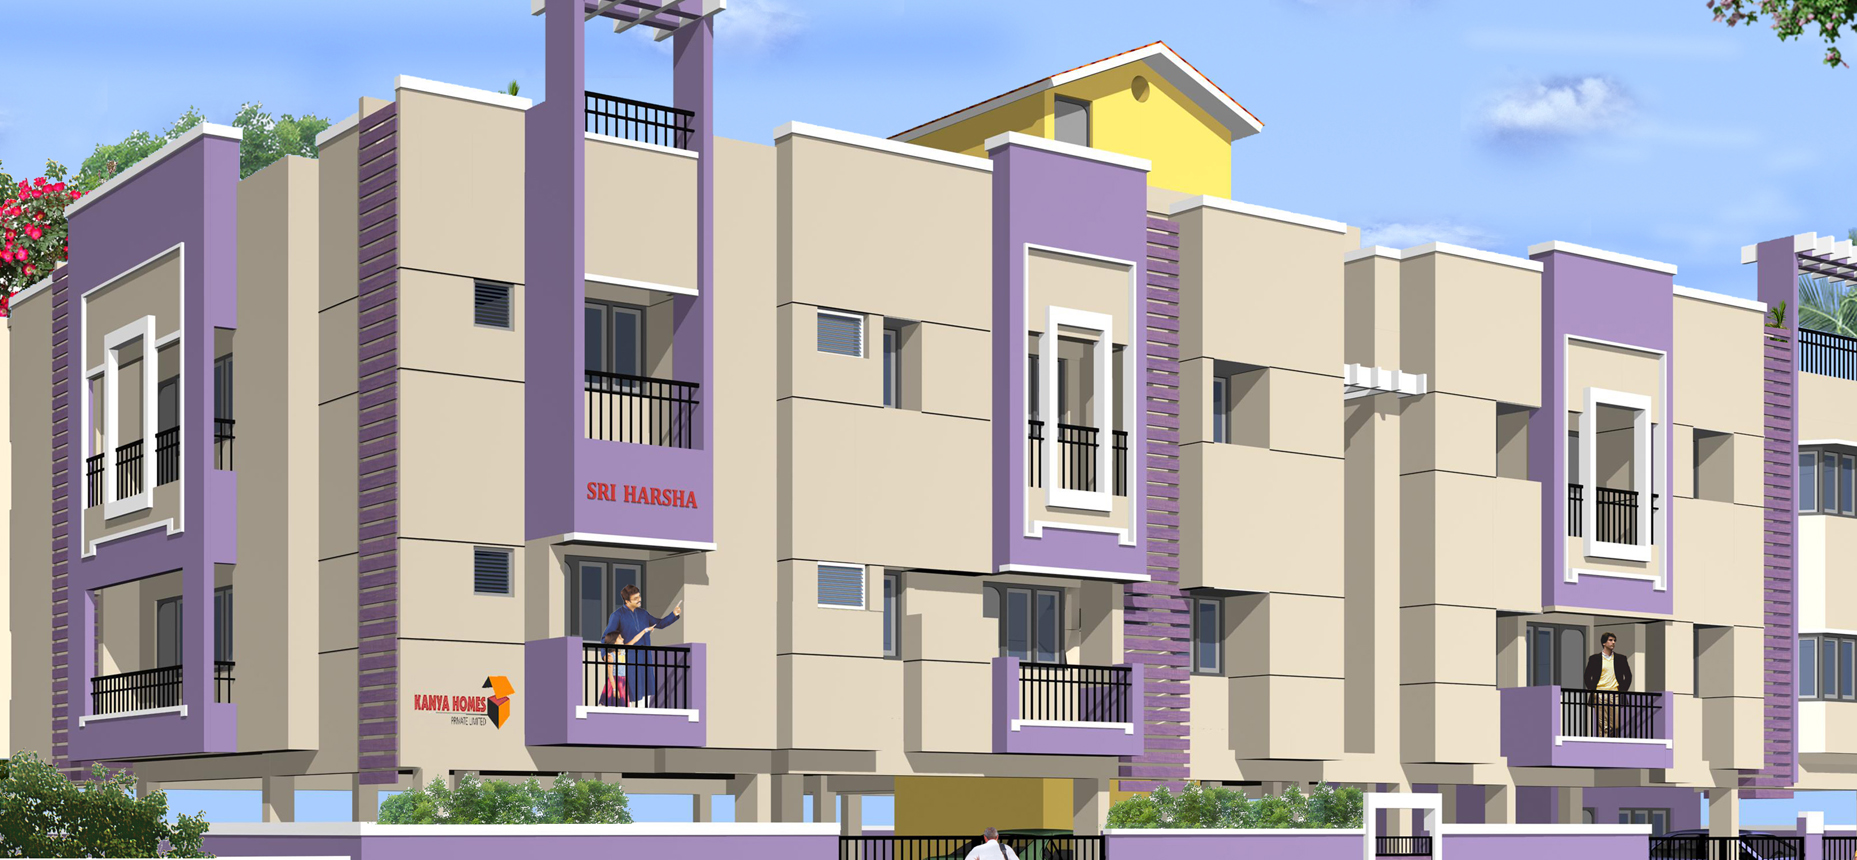 2 bhk flat for sale in chennai